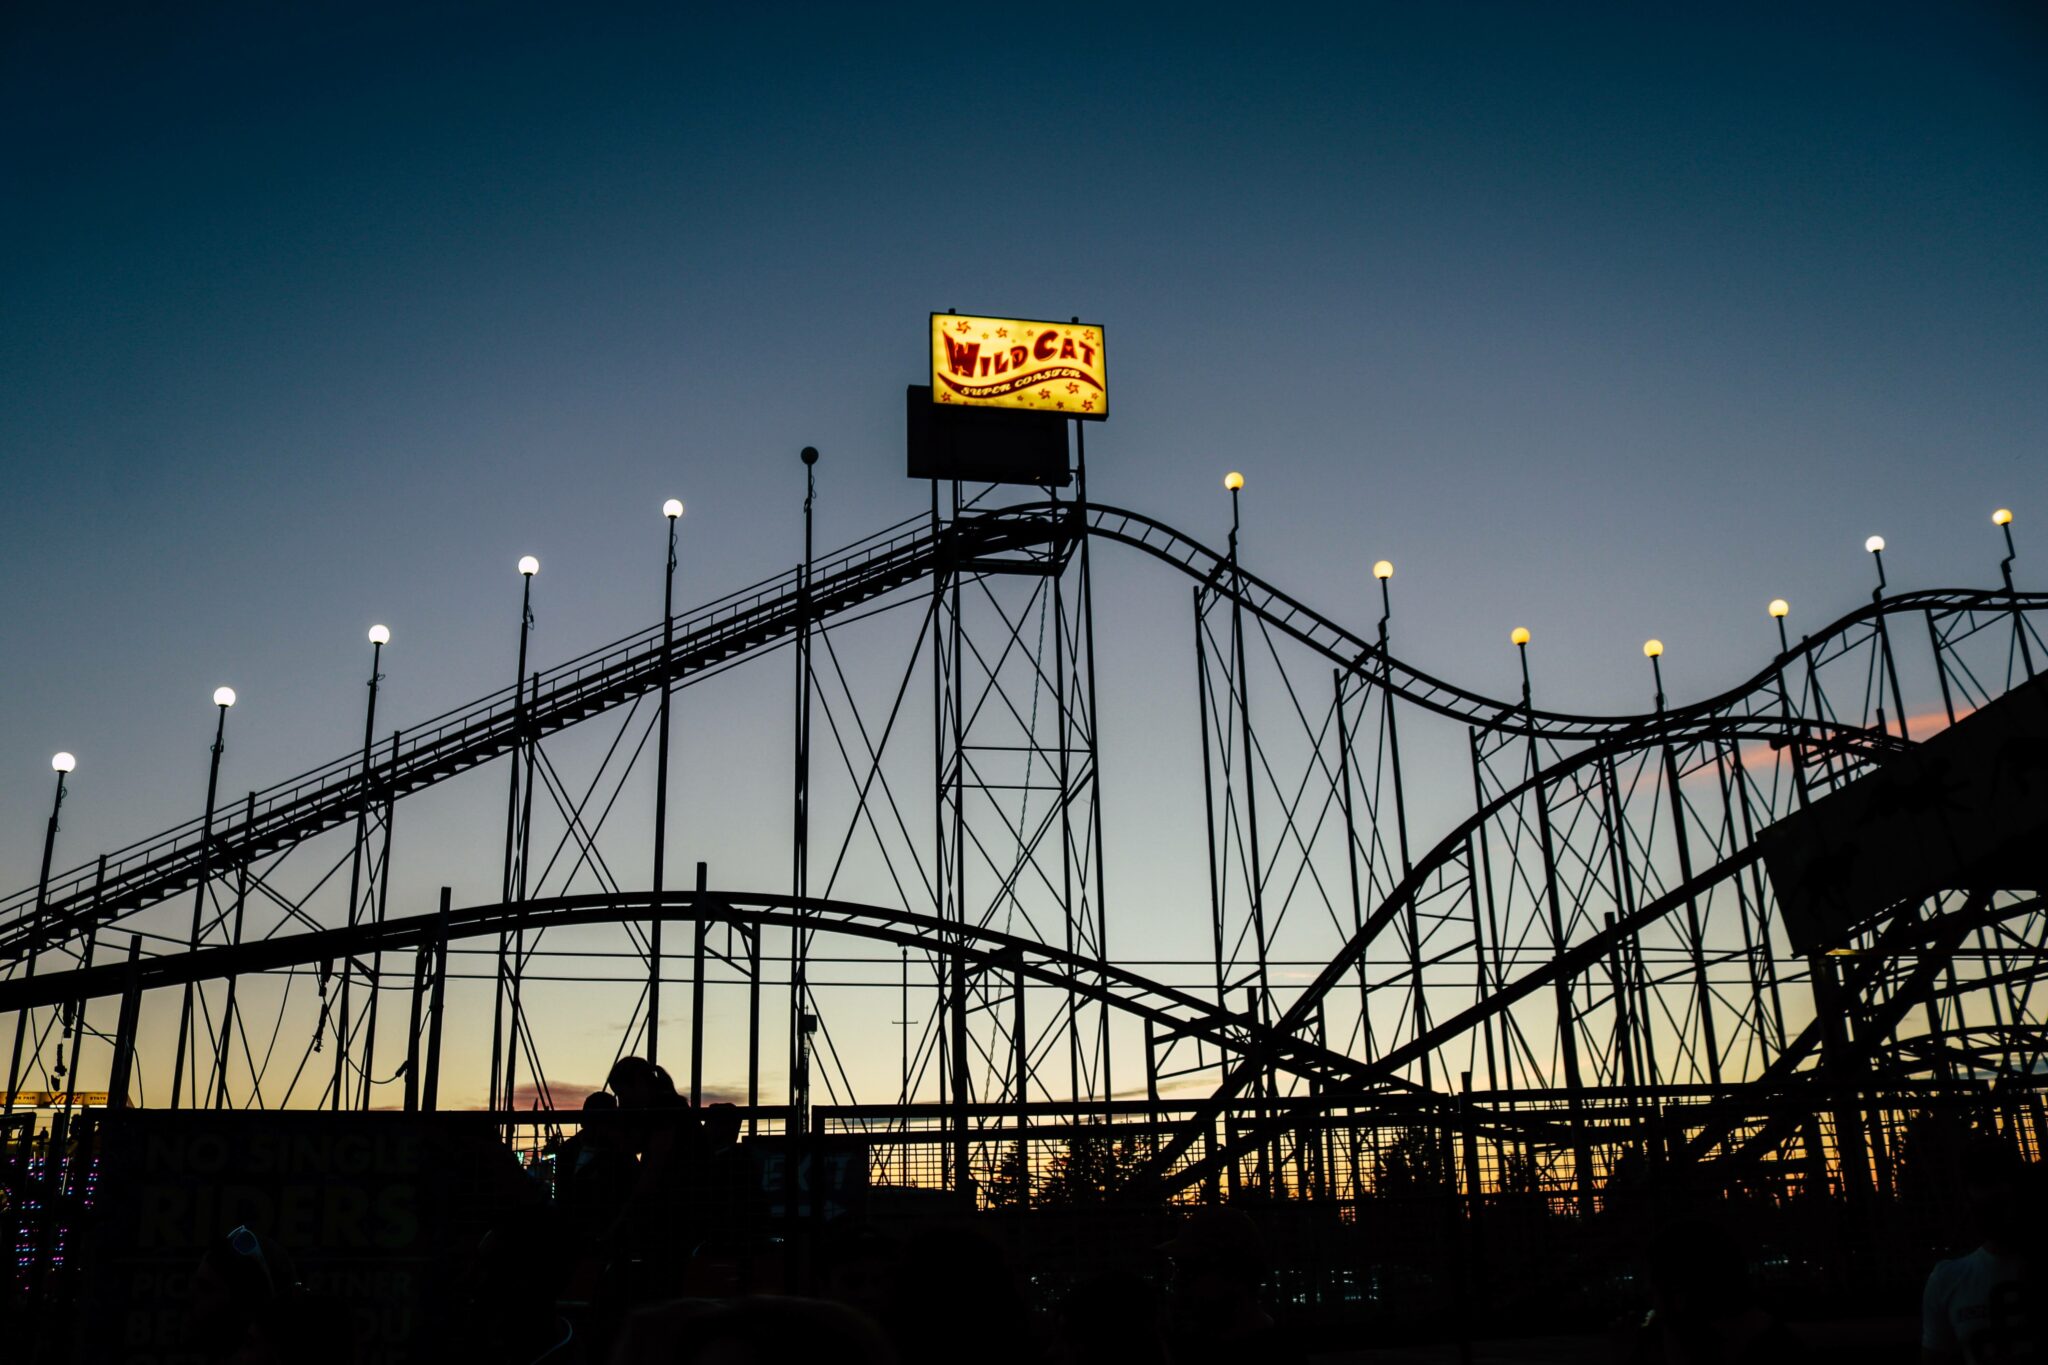 A sun sets behind a roller coaster, making the roller coaster a silhoutte